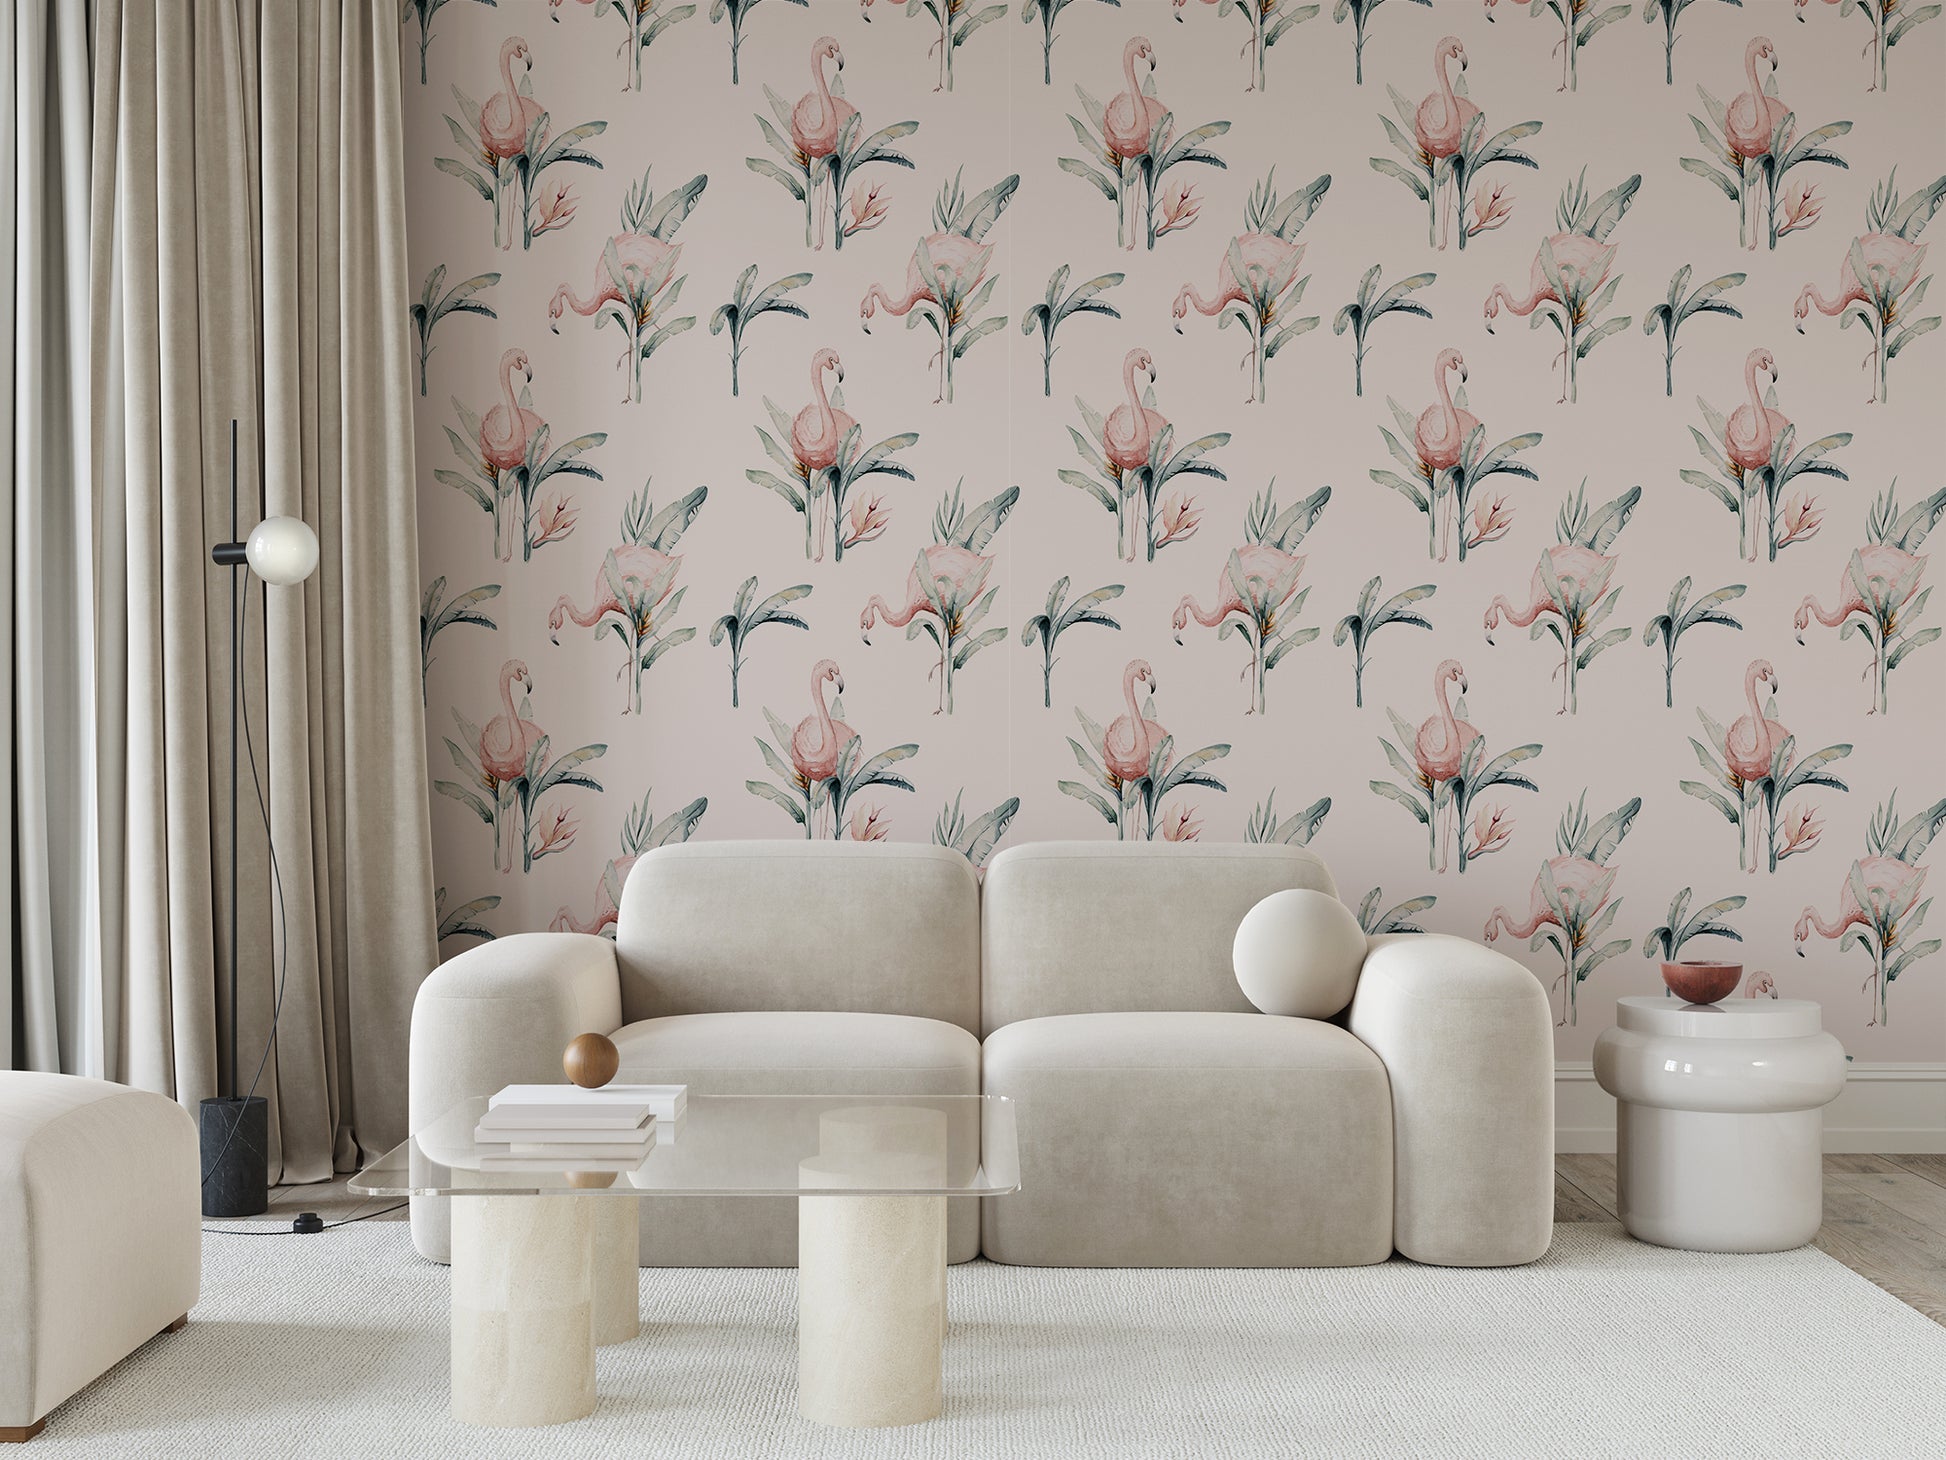 Valencia Pink Flamingo Watercolor Wallpaper in Living Room with Glass Table and Curtains